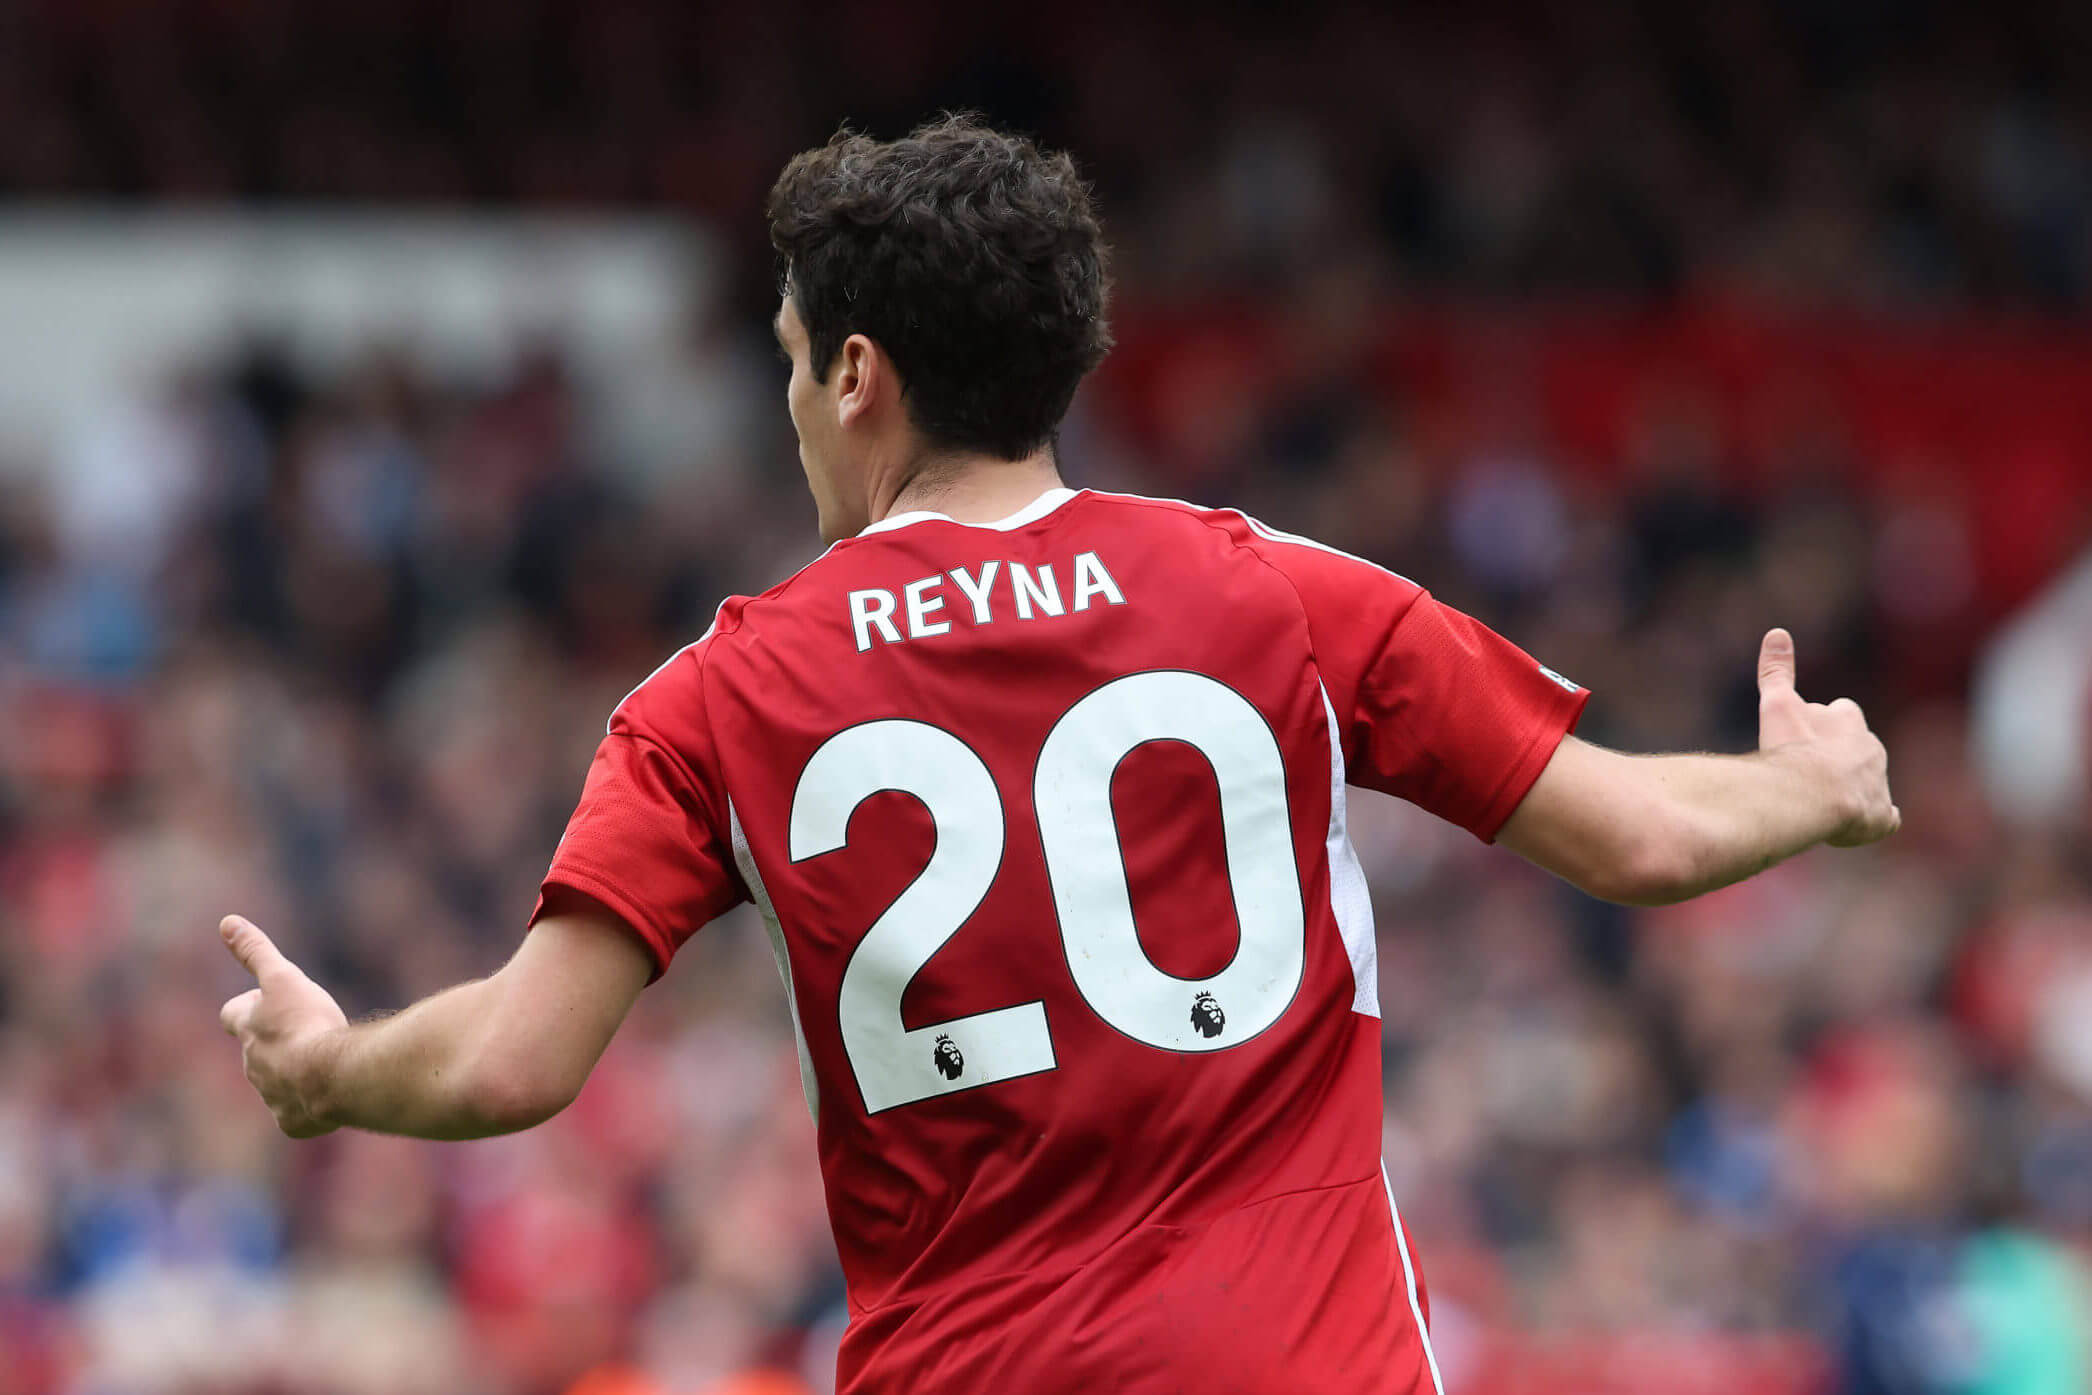 How did Gio Reyna perform in his first start in the Premier League?